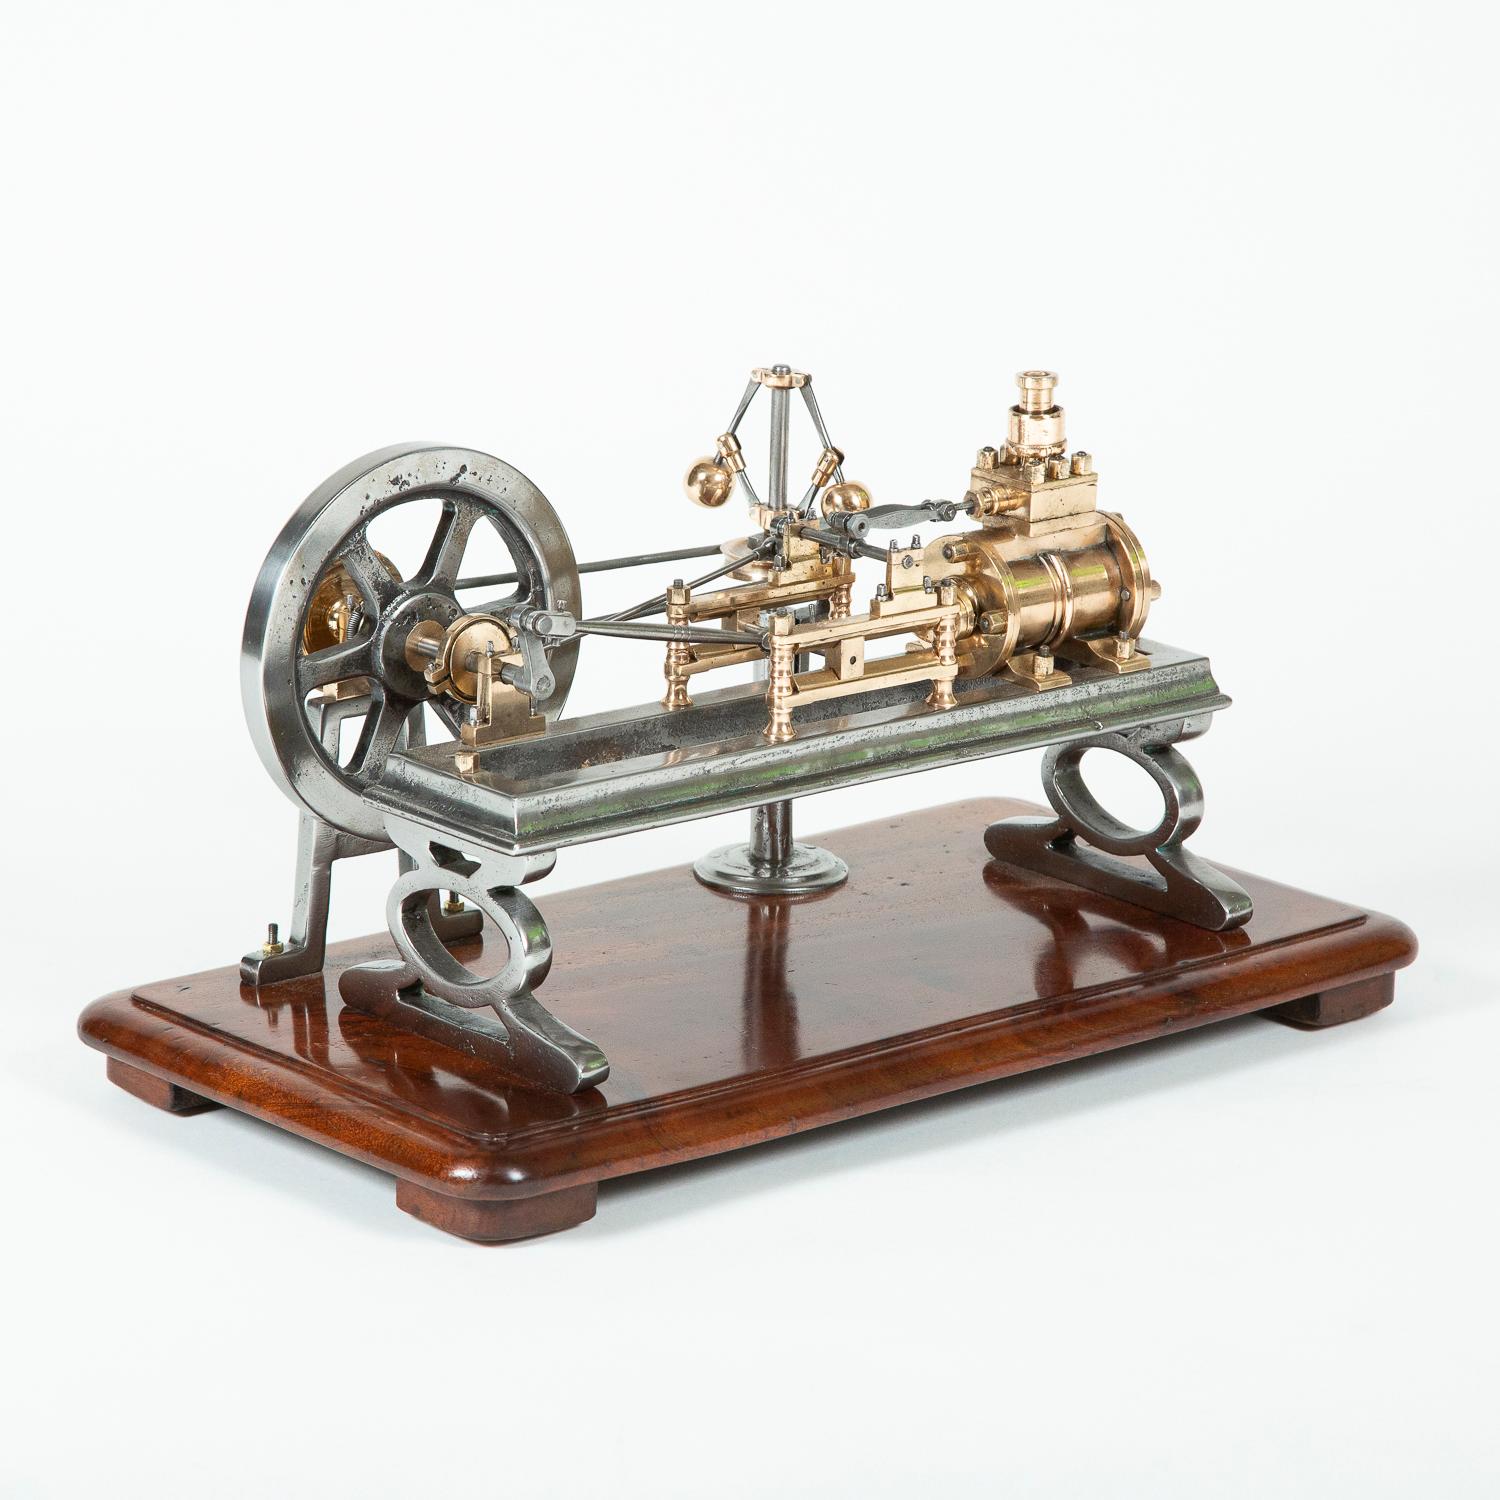 A late 19th century tabletop model of brass and steel live steam engine model of a single-cylinder horizontal mill engine, with cast flywheel and separate governor on a pedestal. 

Mounted on a period mahogany plinth.